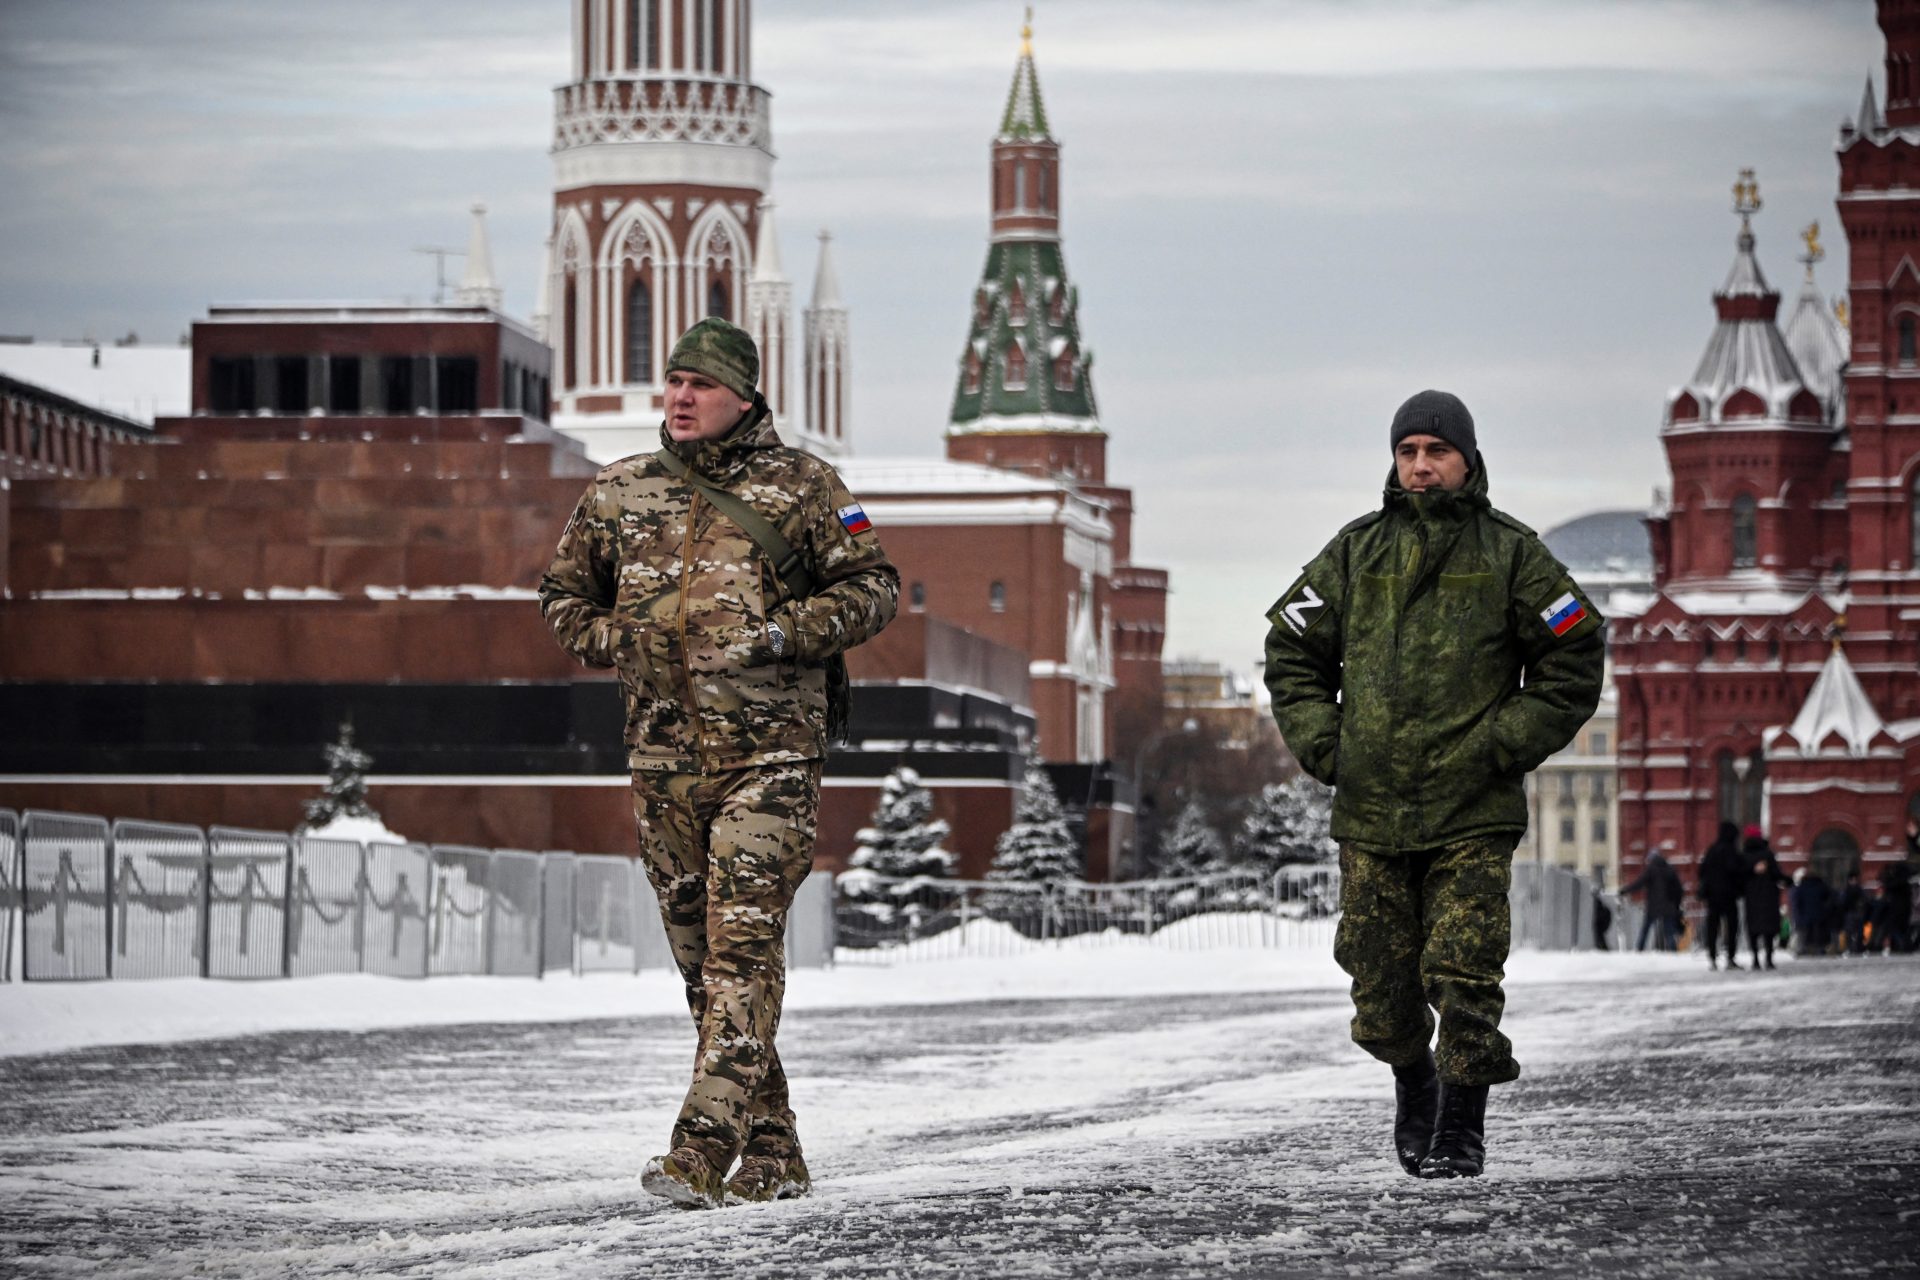 Russia celebrates recapturing a tiny village but does it really matter?